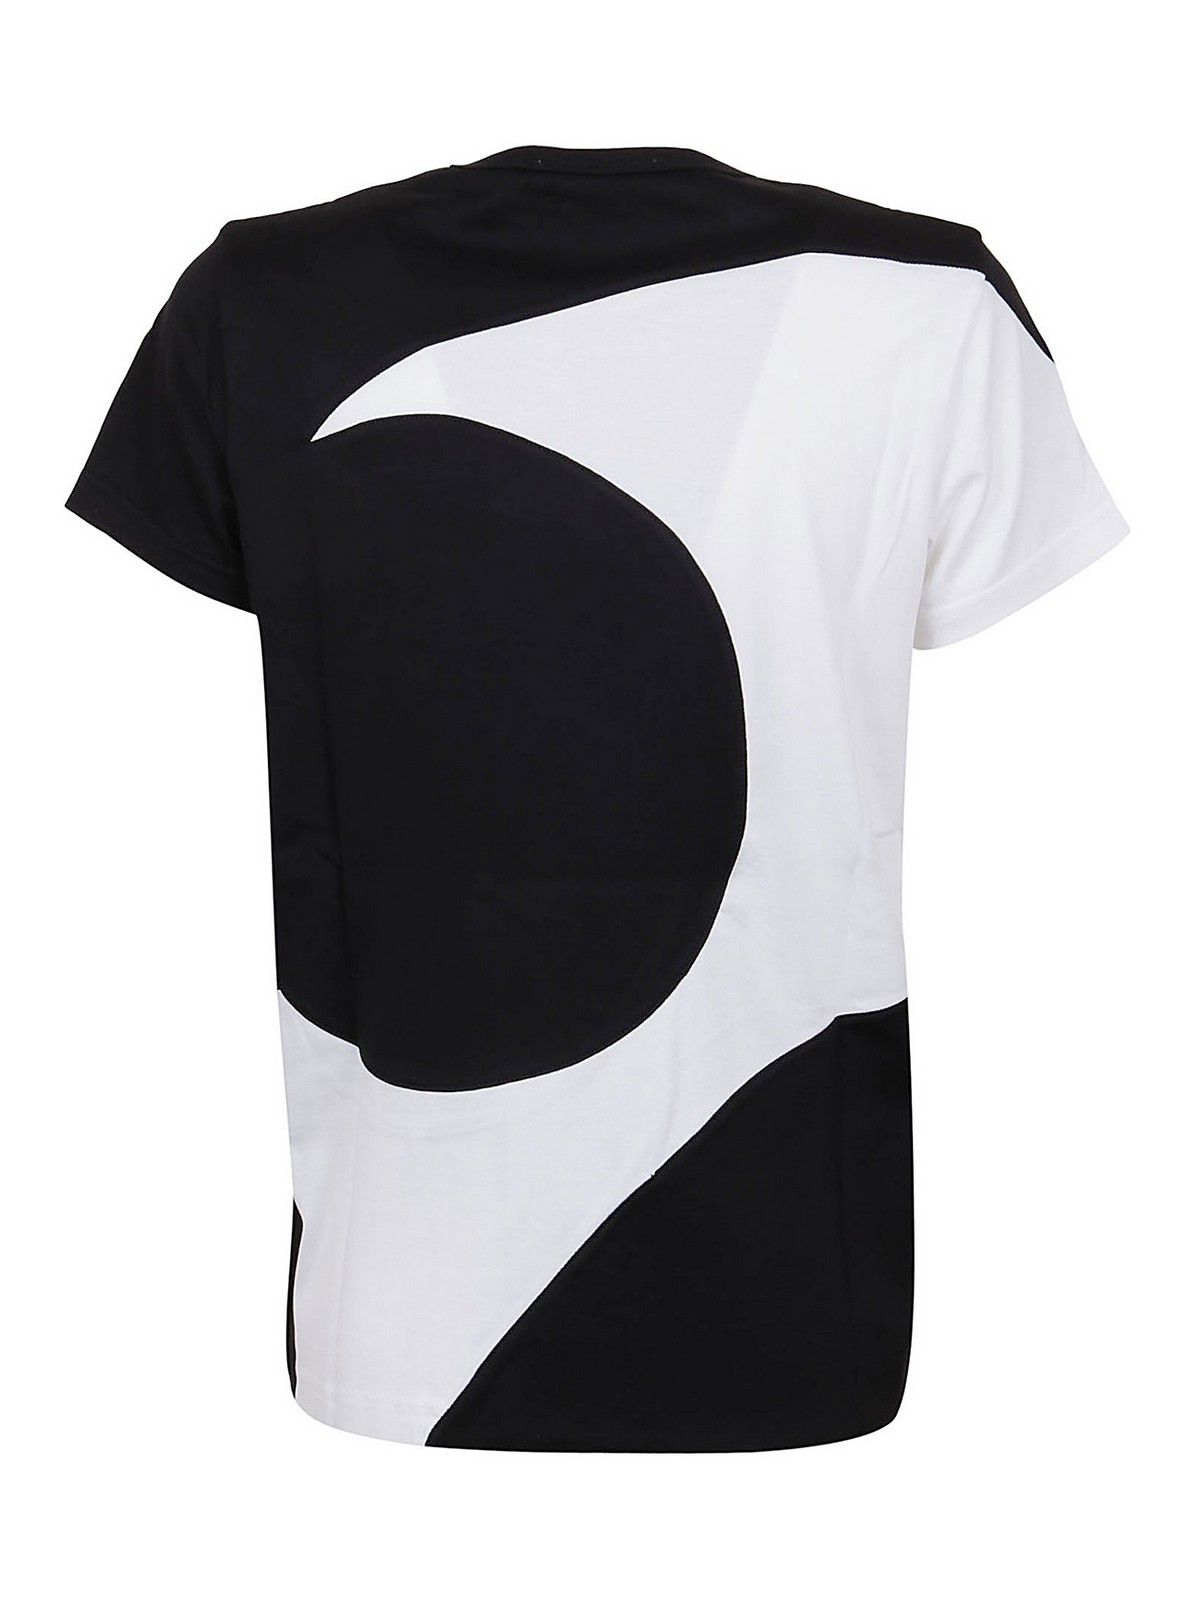 givenchy black and white shirt